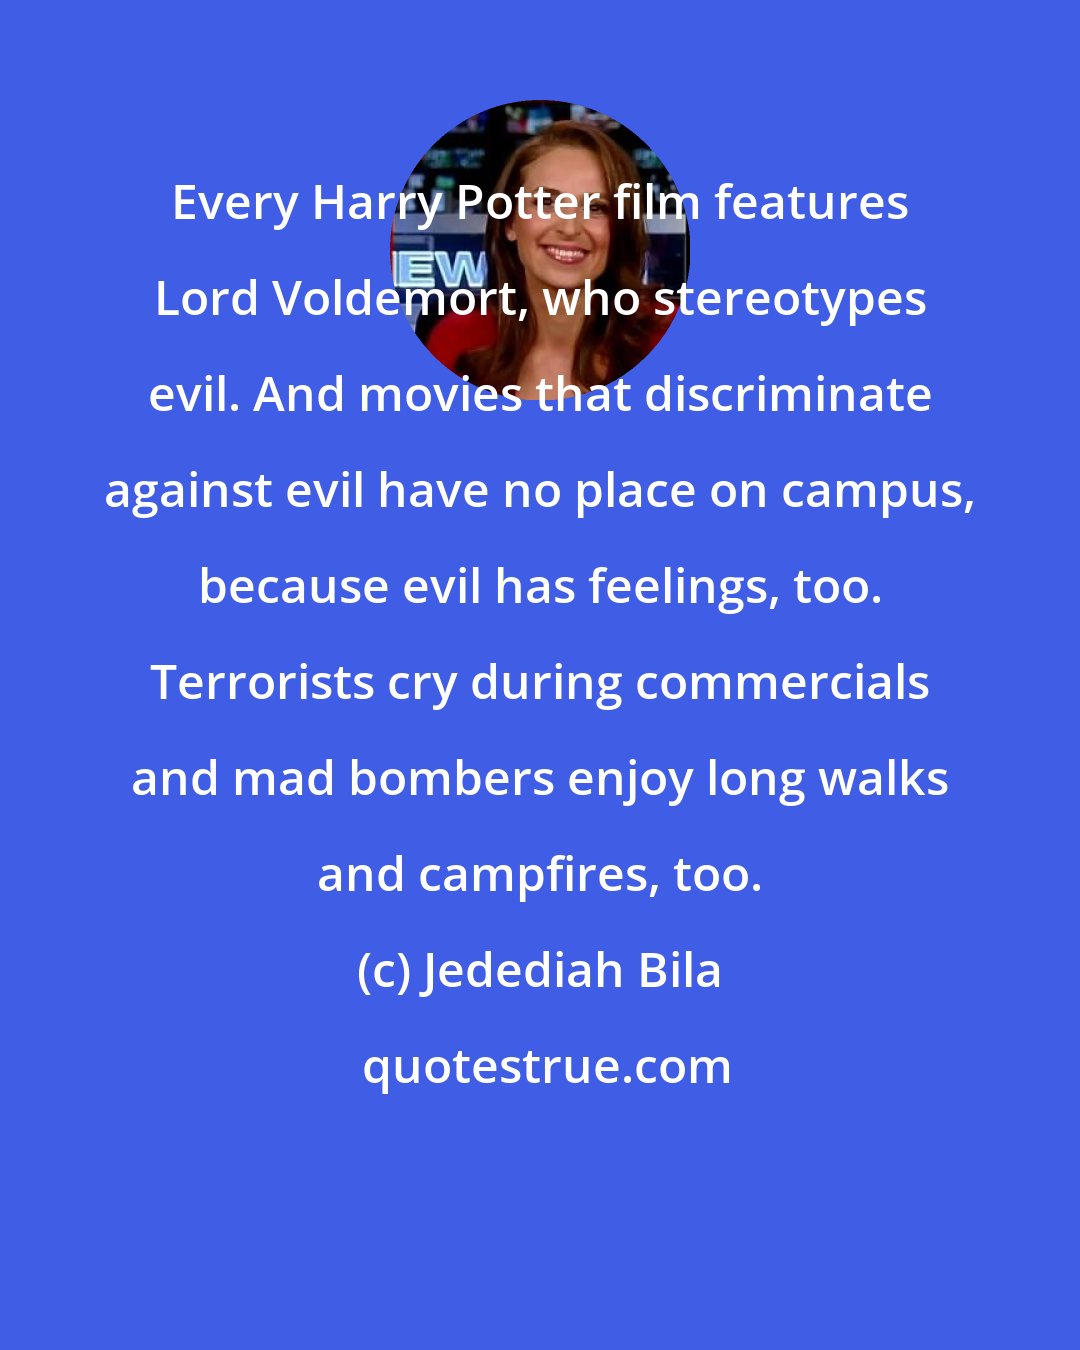 Jedediah Bila: Every Harry Potter film features Lord Voldemort, who stereotypes evil. And movies that discriminate against evil have no place on campus, because evil has feelings, too. Terrorists cry during commercials and mad bombers enjoy long walks and campfires, too.